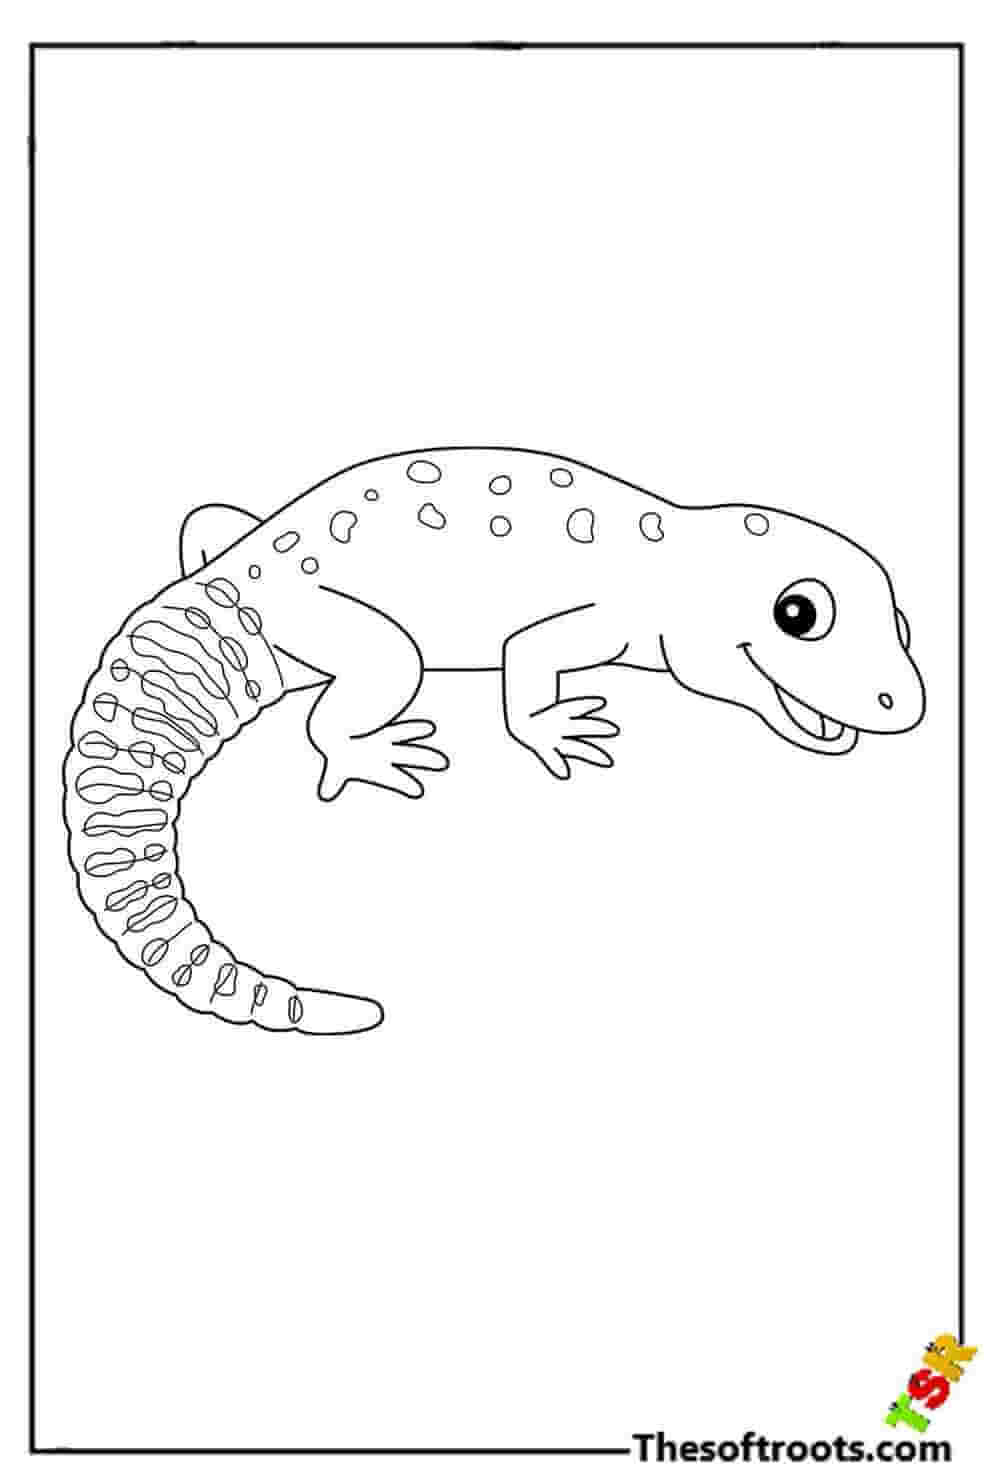 Laughing lizard coloring pages